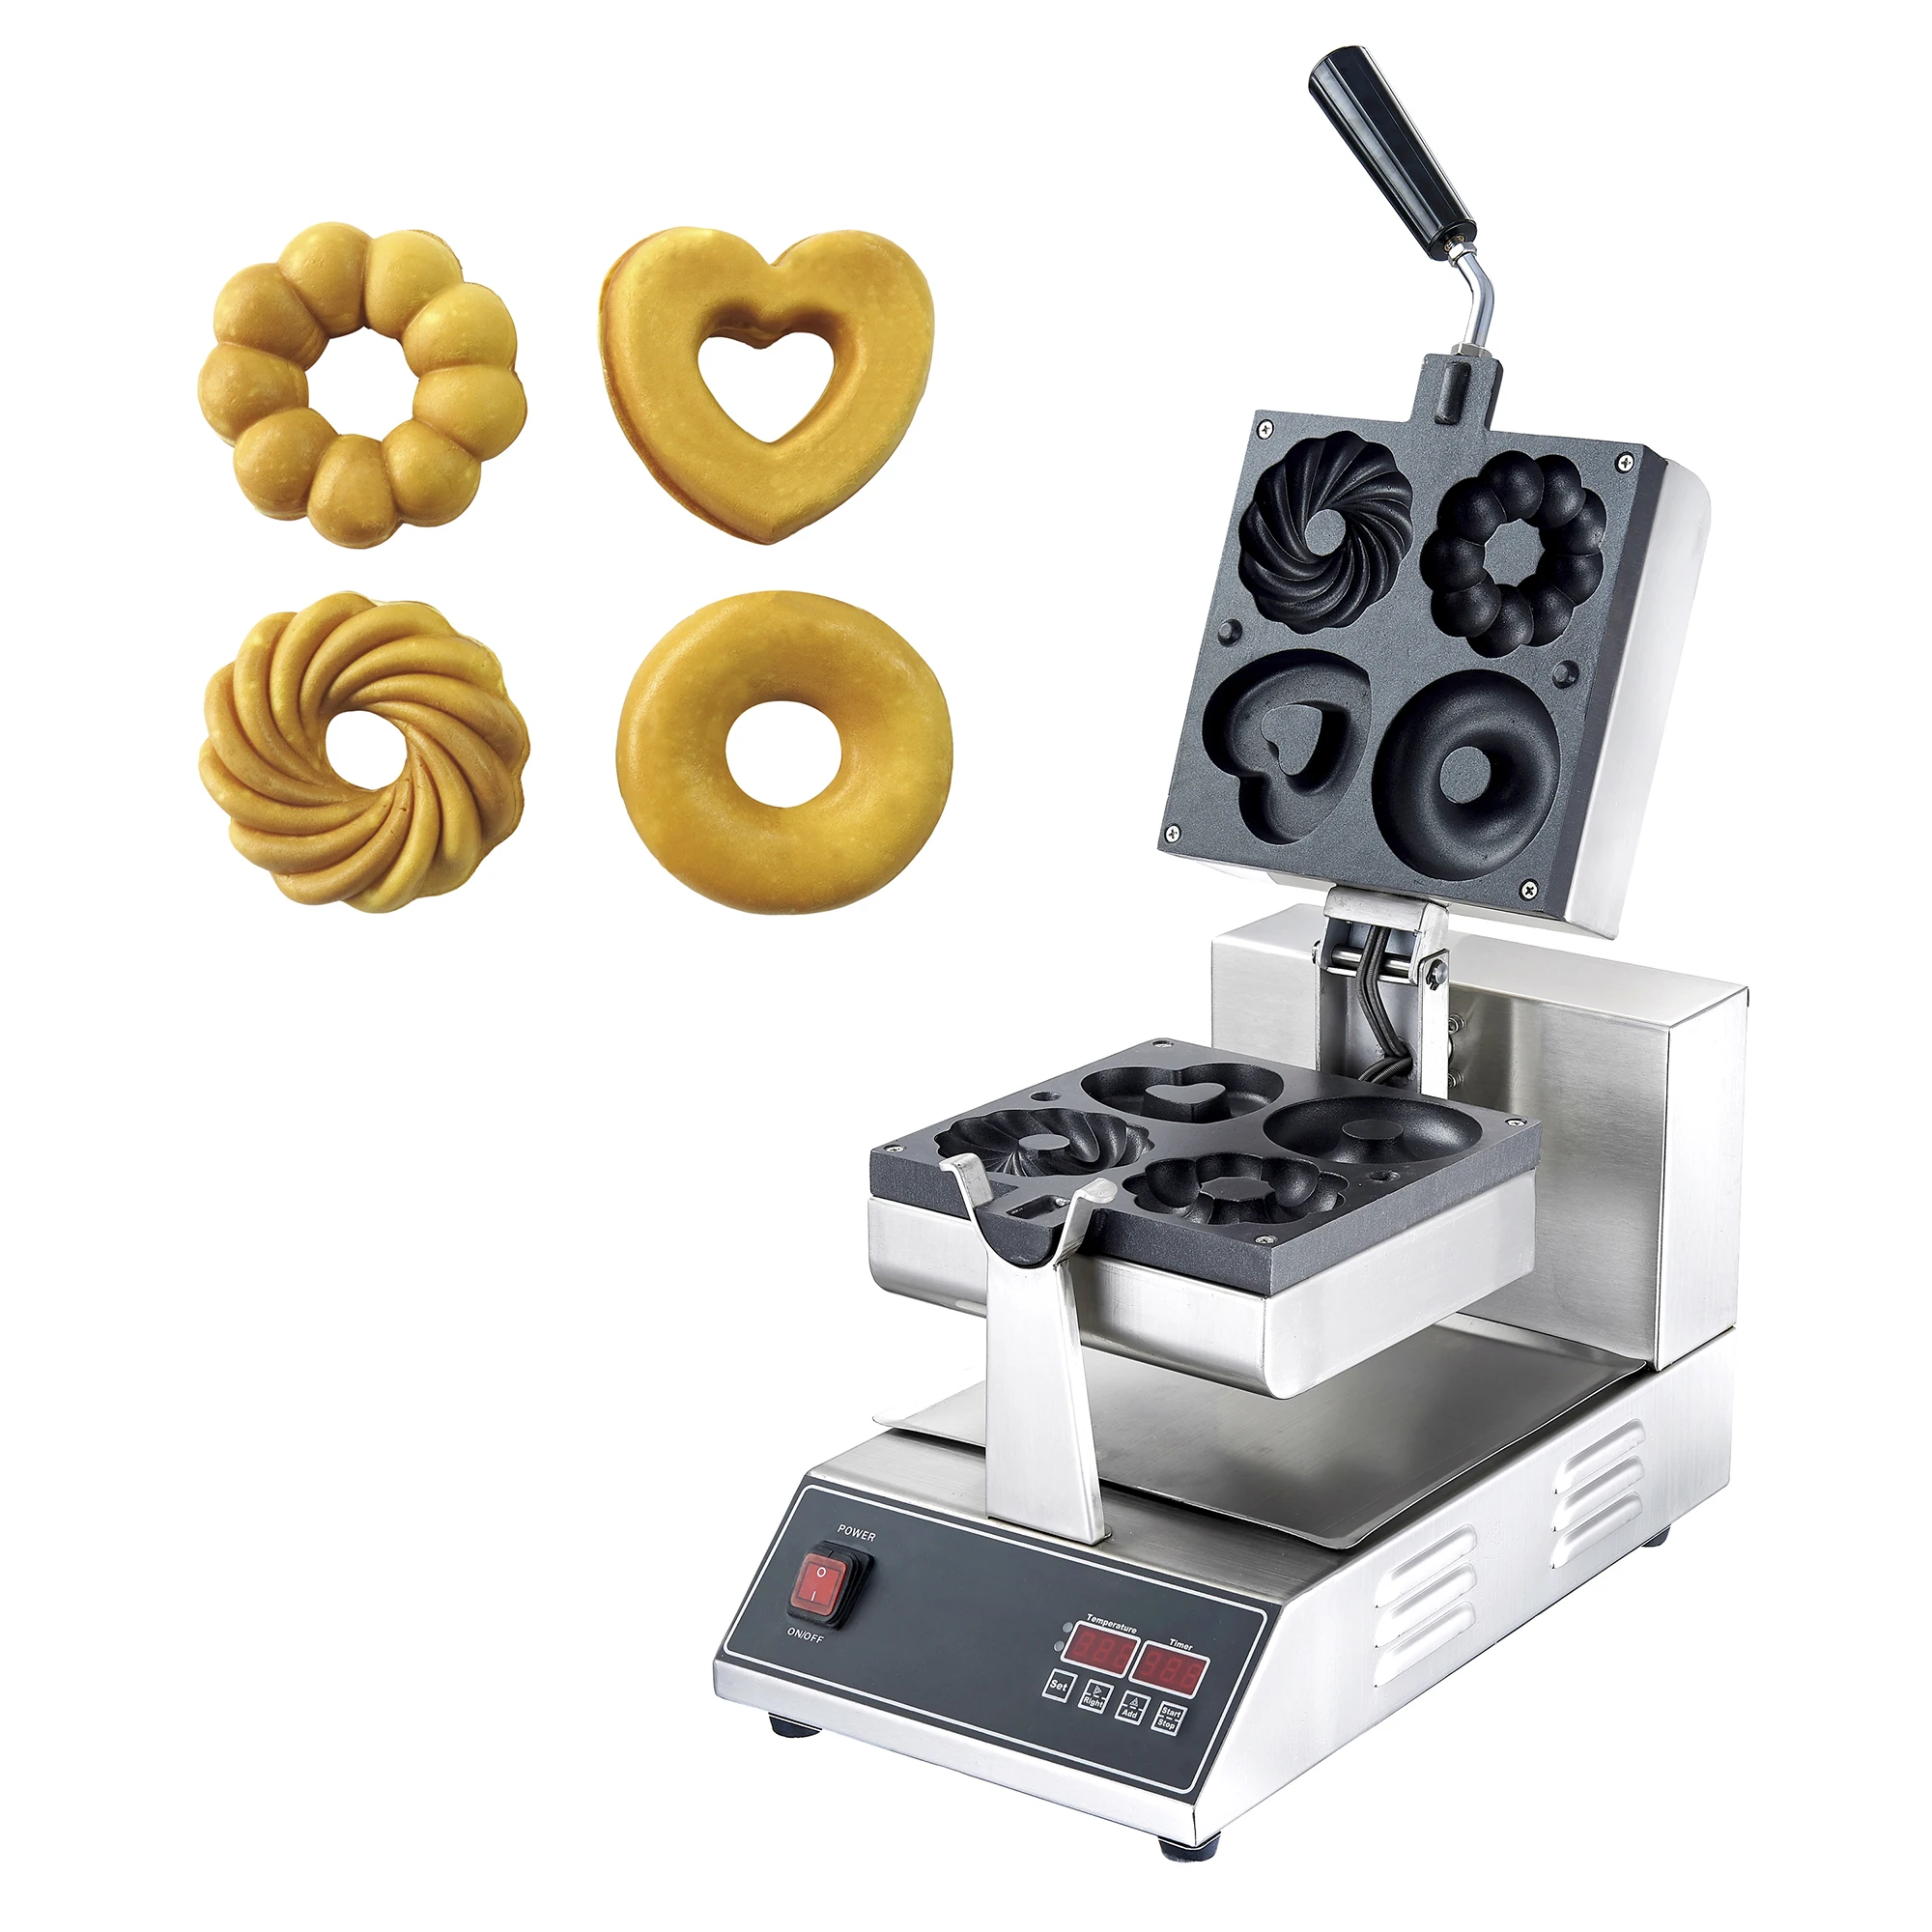 

Hot Sale 220V Automatic Electric Waffle Maker Mini Donut Machine Commercial High Quality Donut Making Machines